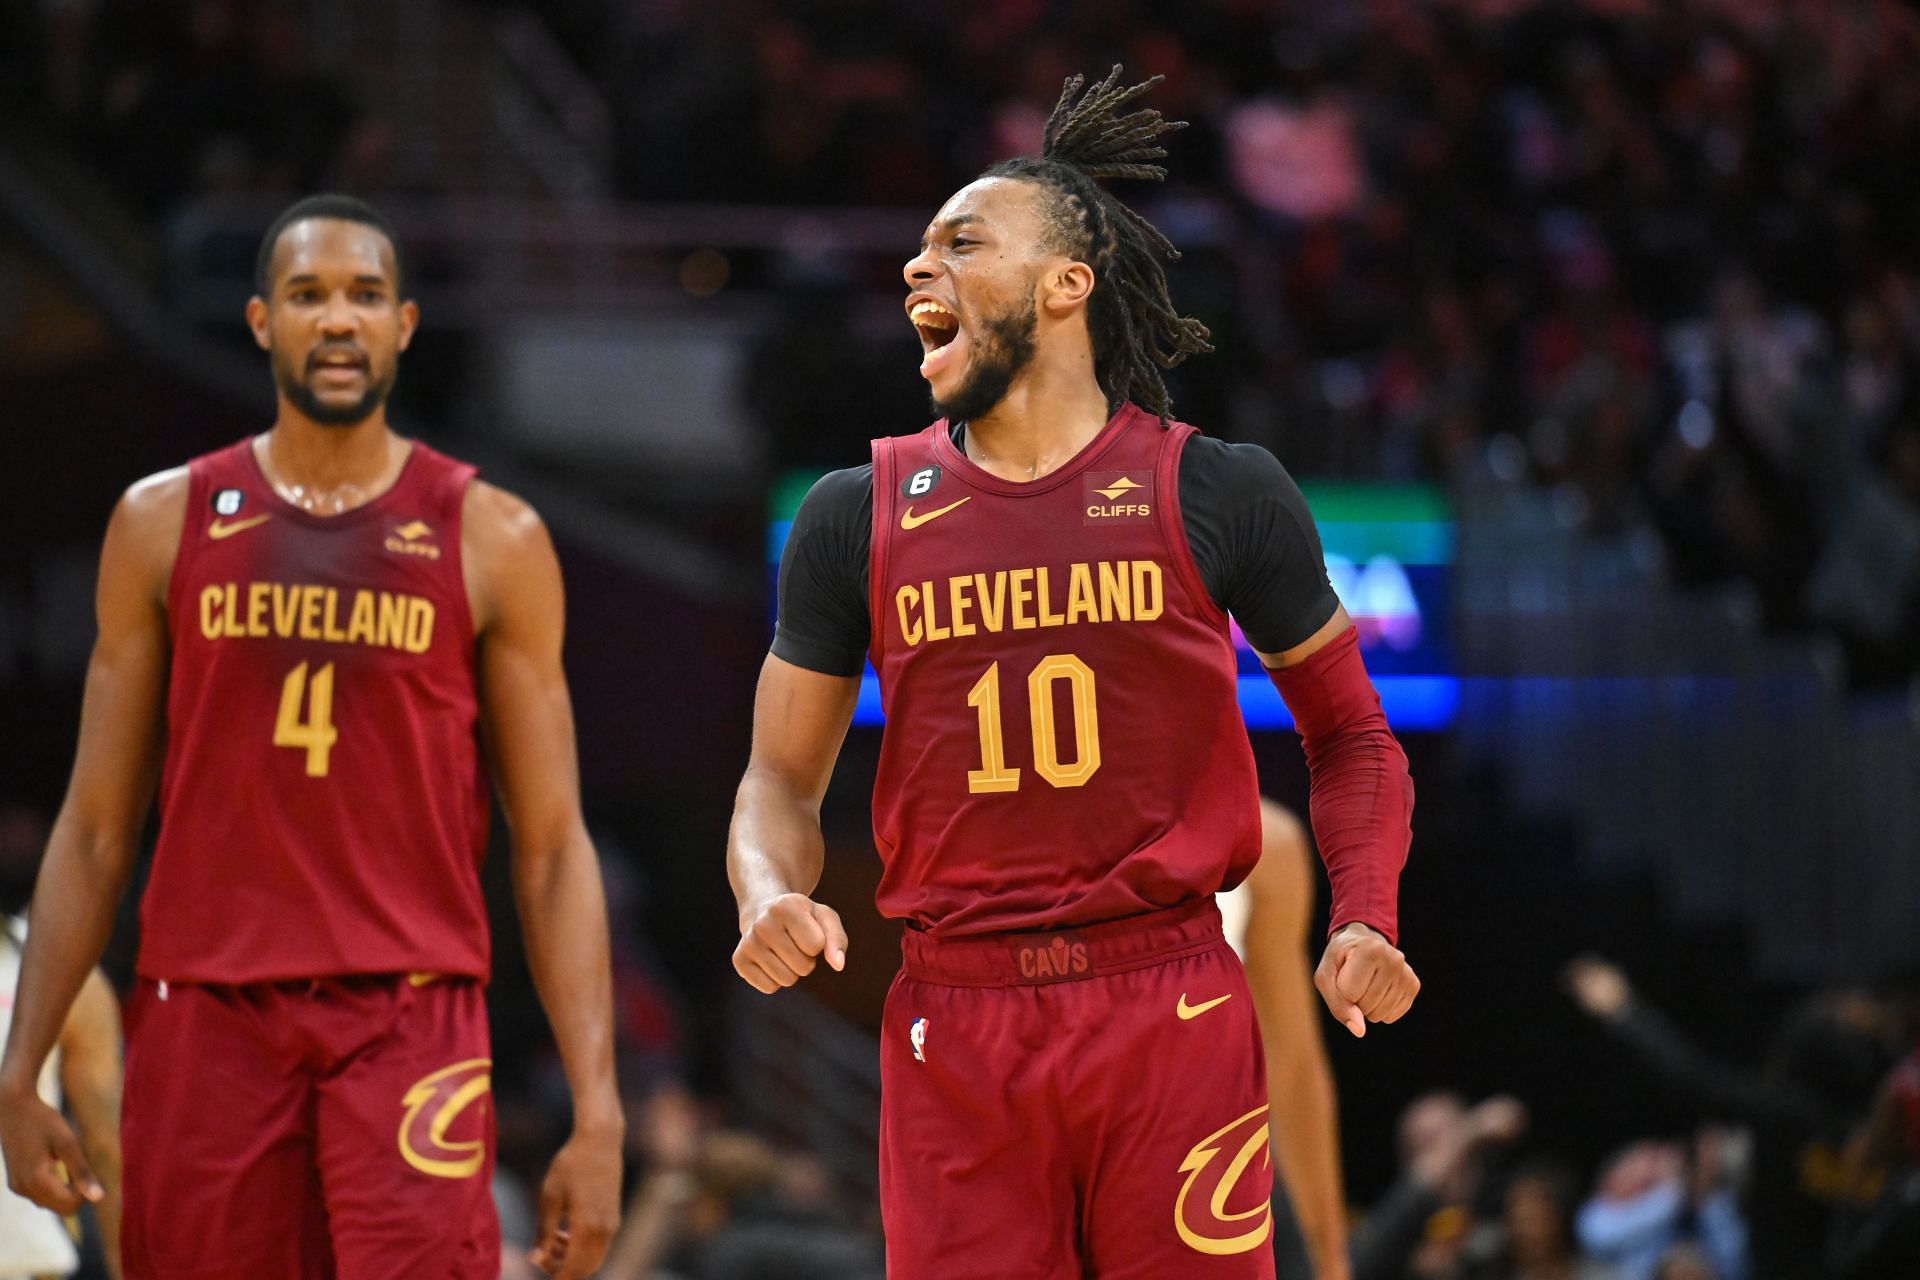 New Orleans Pelicans v Cleveland Cavaliers